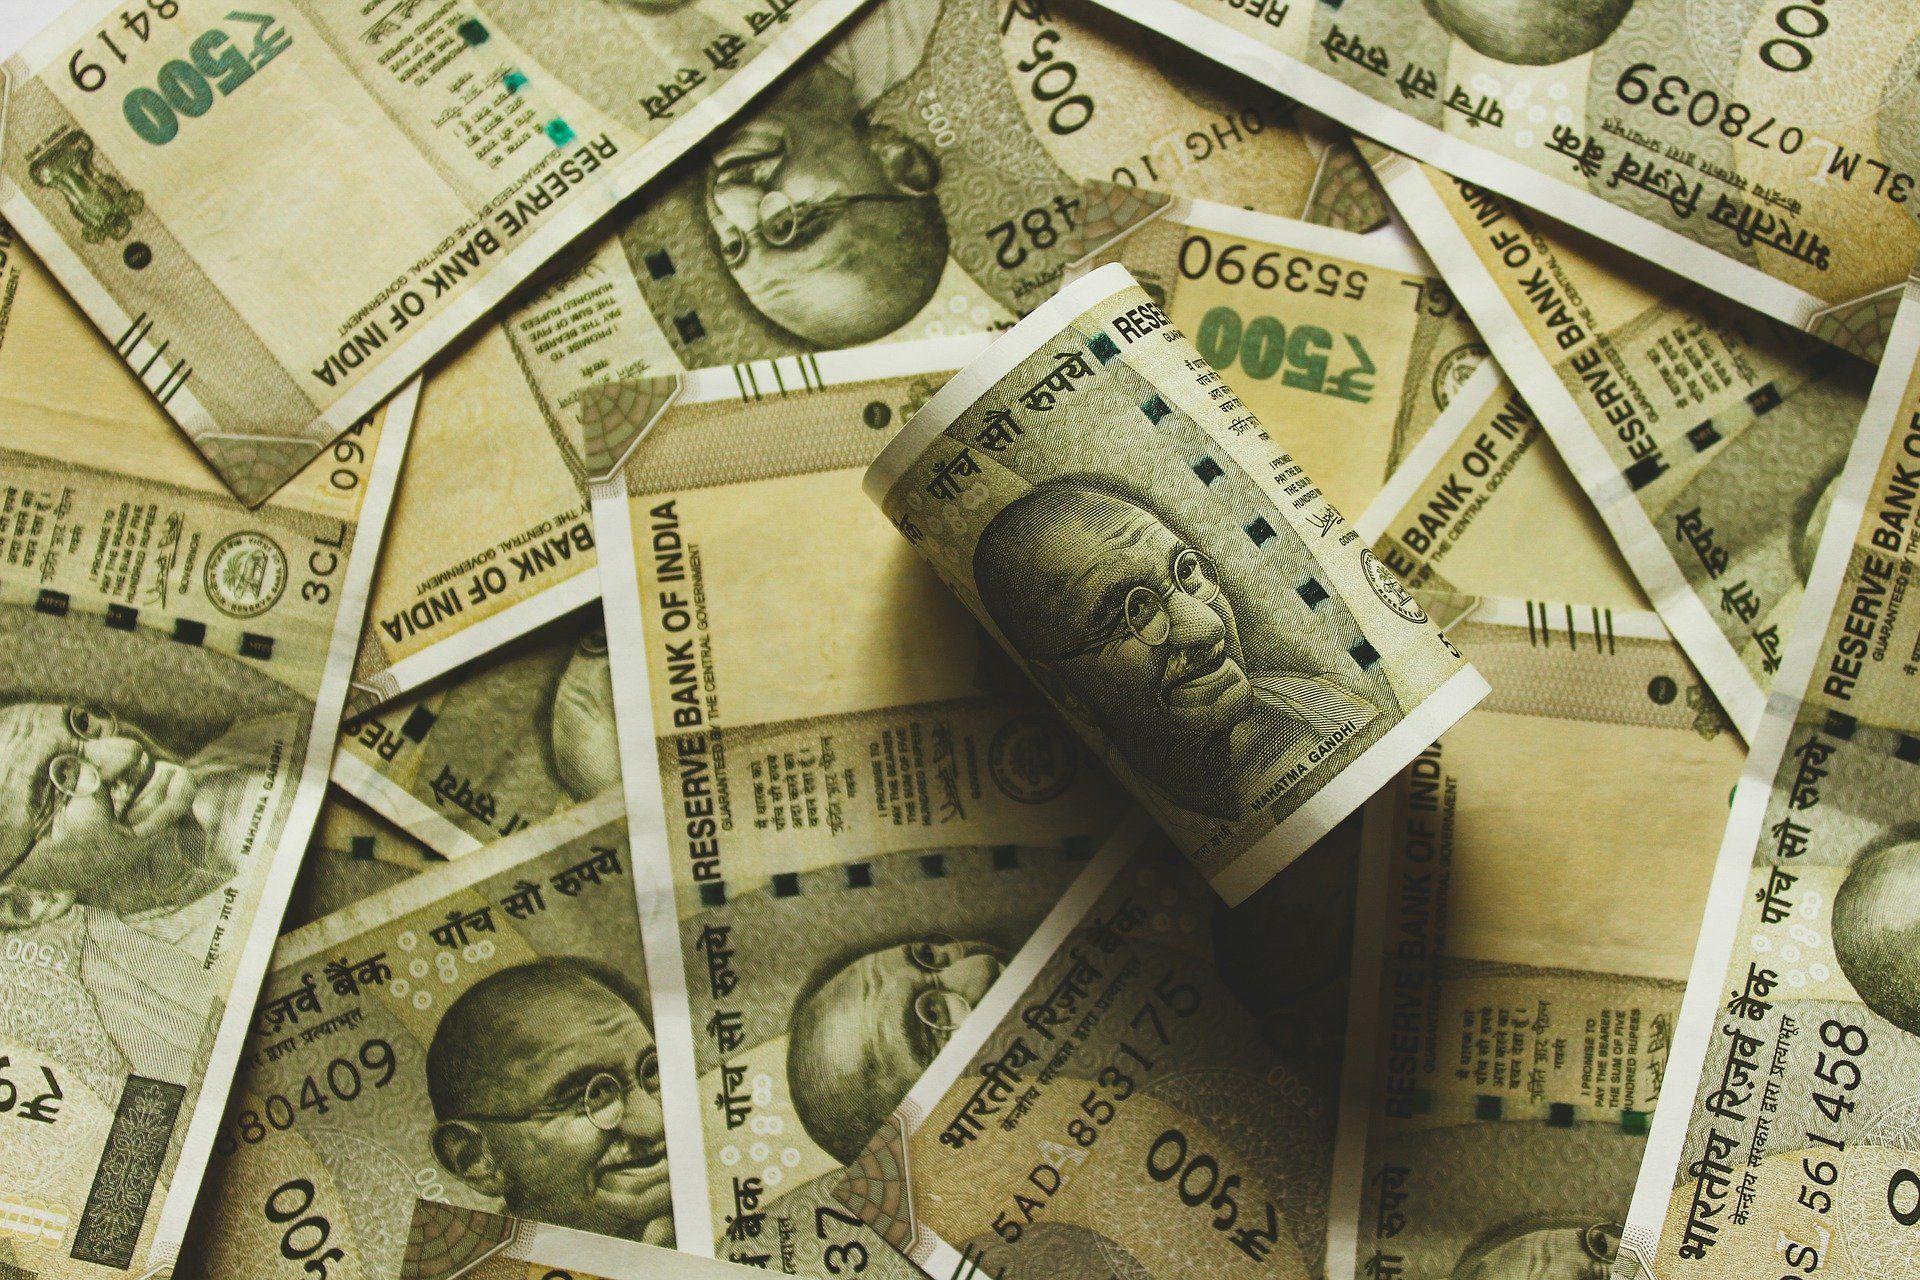 Rupee slips 12 paise to 79.90 against US dollar, Yen falls to 24-year low